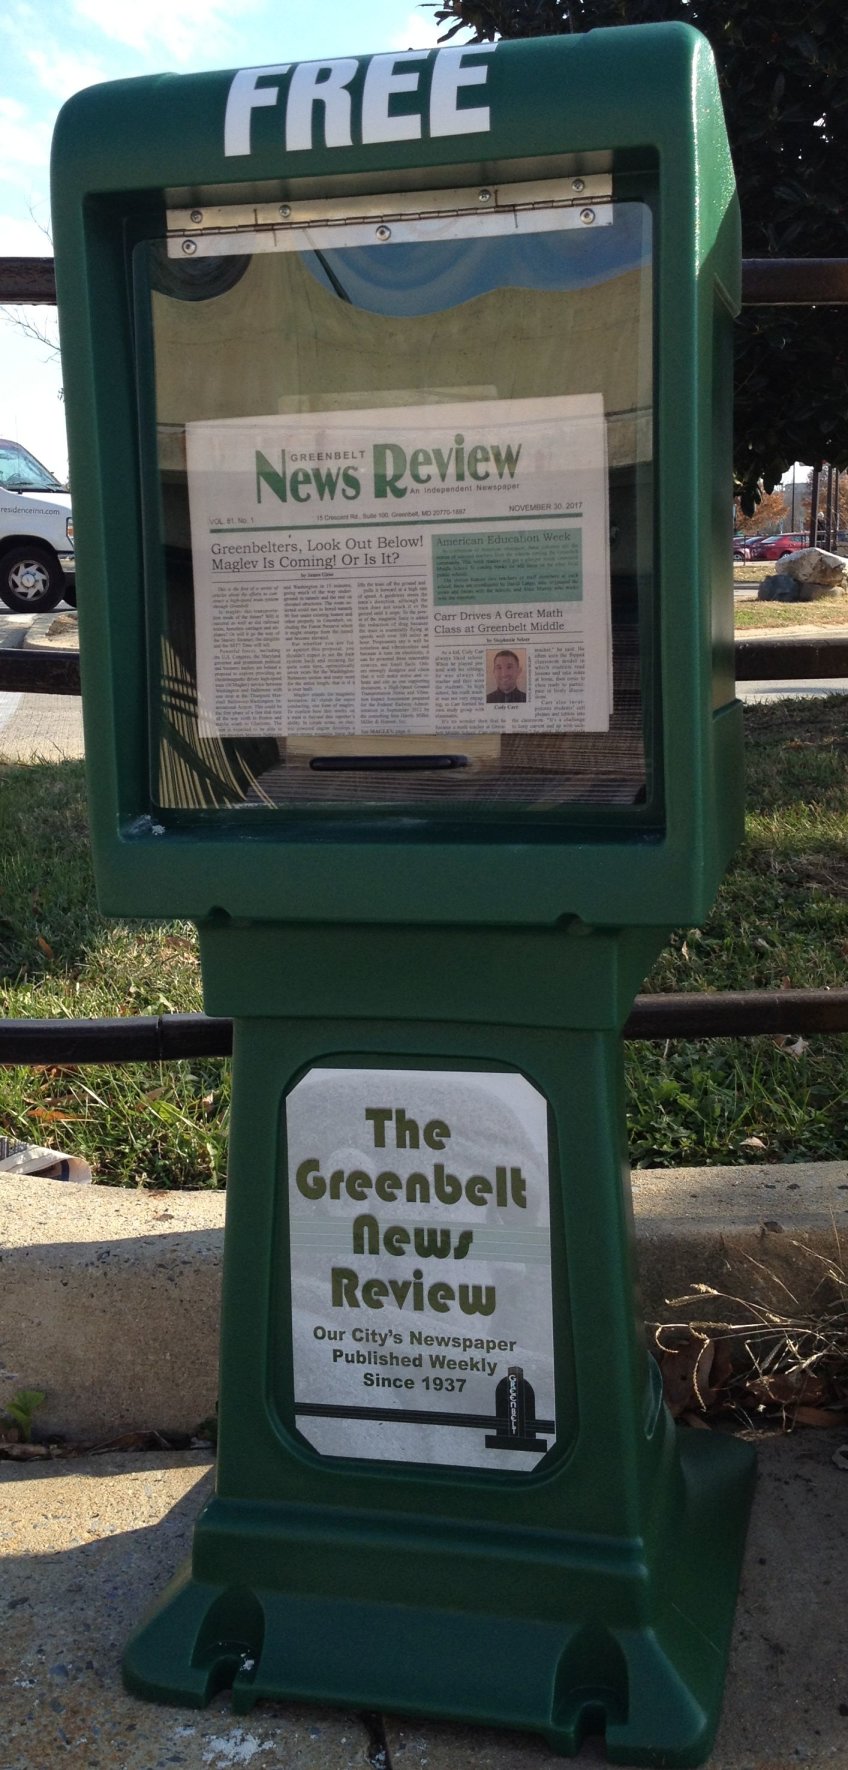 Greenbelt News Review Deploys Boxes to Deliver Papers in Greenbelt West